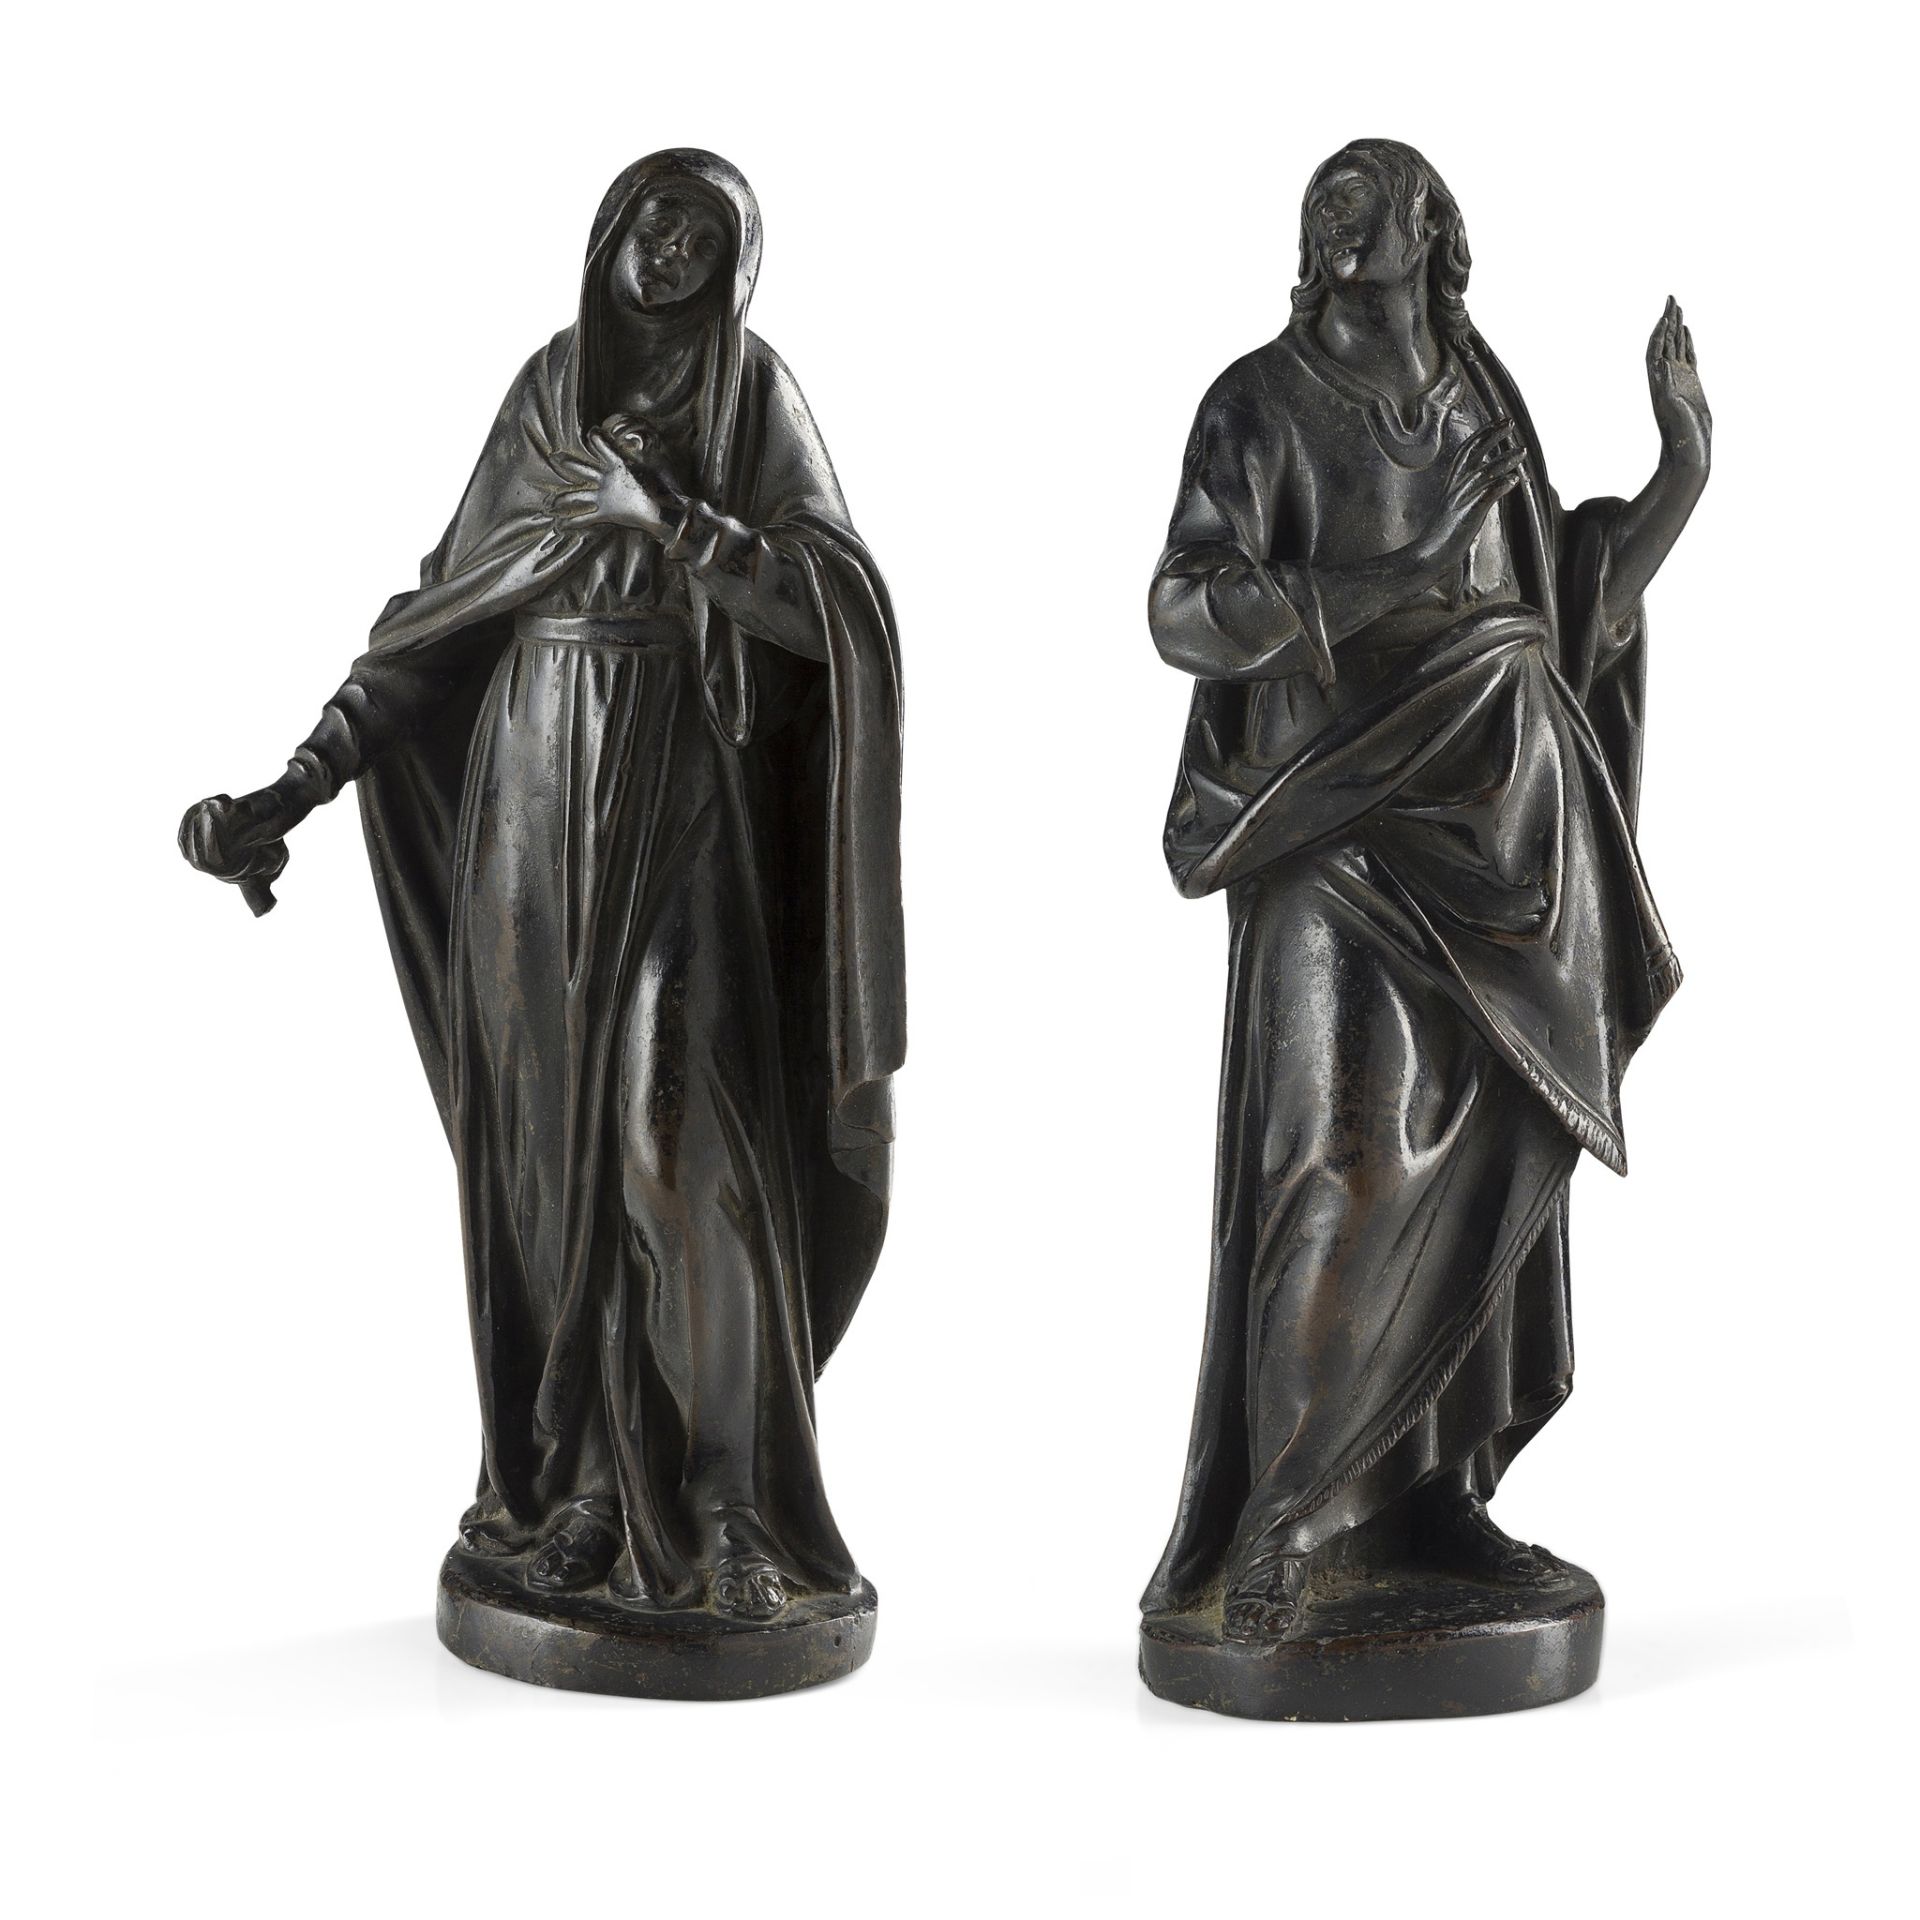 PAIR OF ITALIAN BRONZE FIGURES OF THE VIRGIN MARY AND THE BELOVED DISCIPLE EARLY 17TH CENTURY